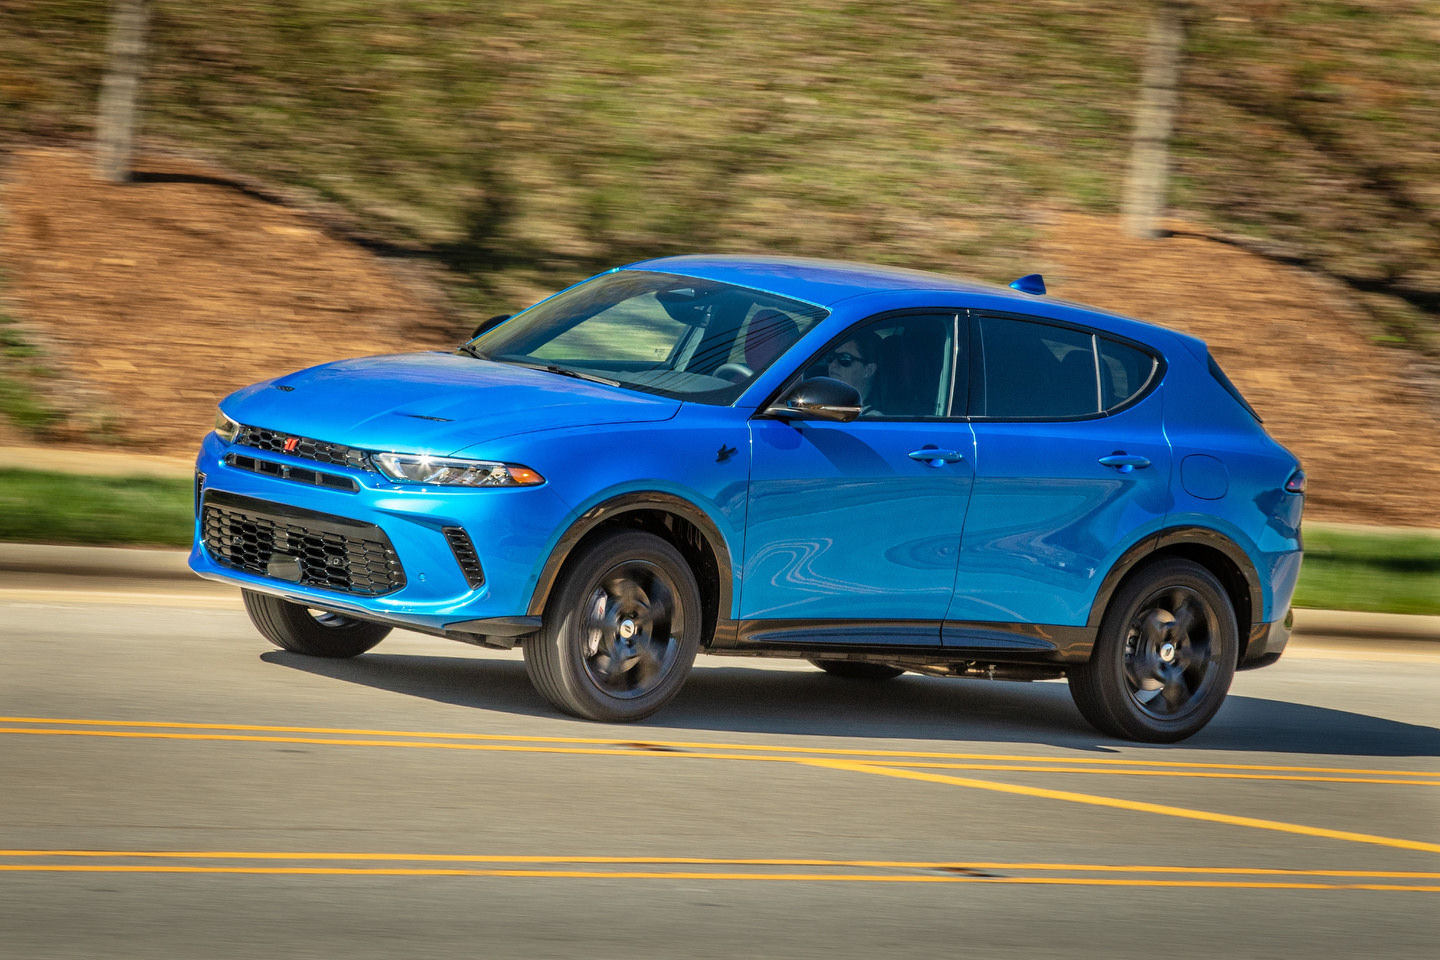 The 2023 Dodge Hornet: Revolutionizing Performance and Technology in the Compact Utility Vehicle Segment